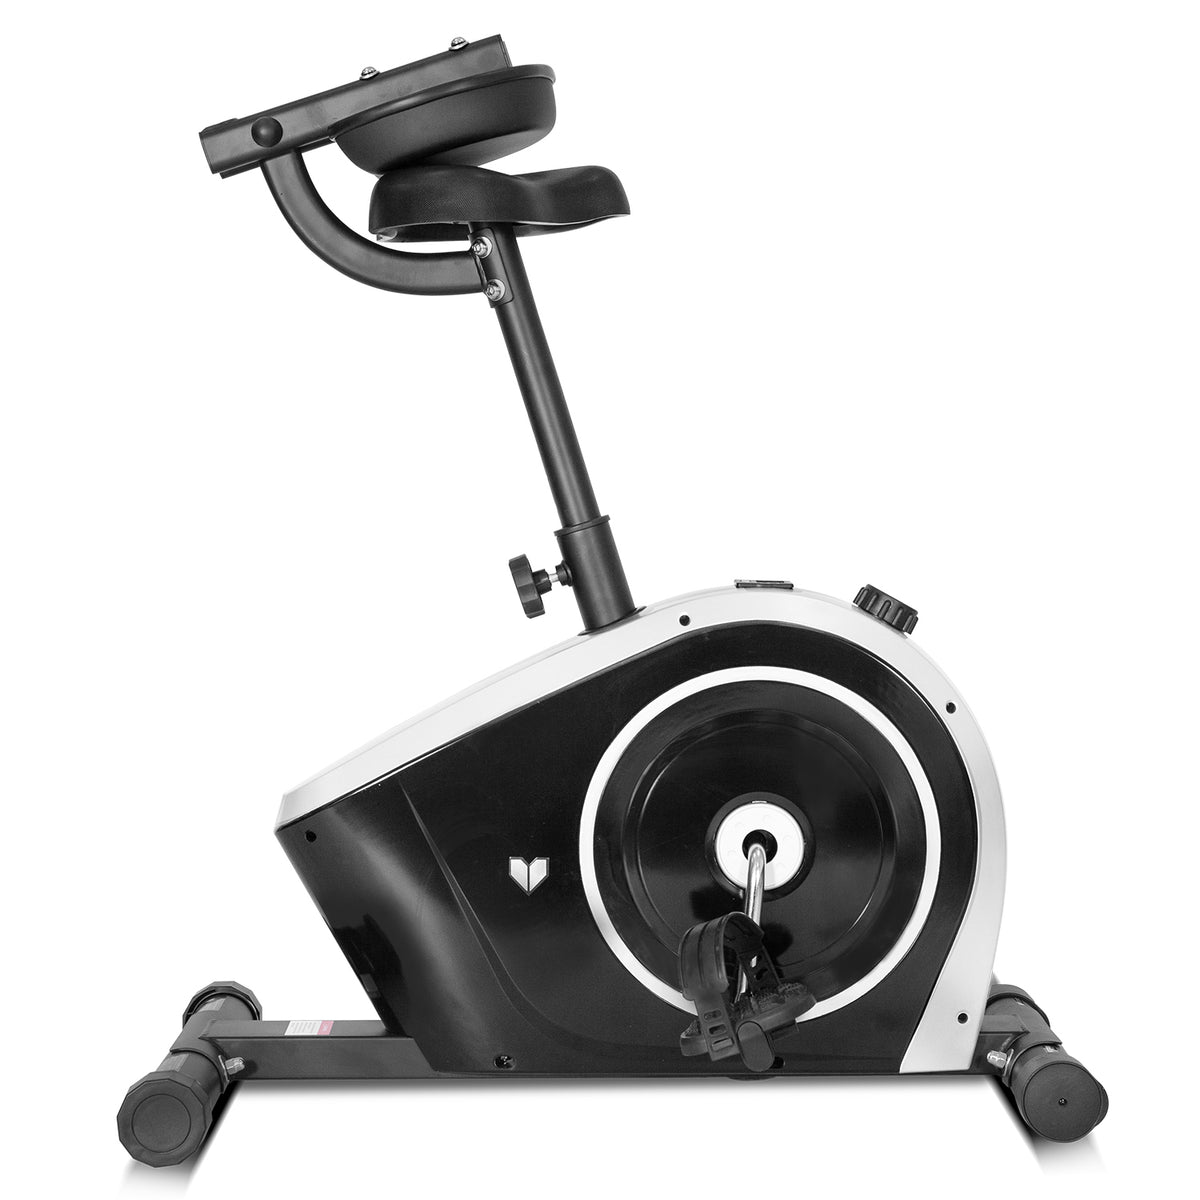 Lifespan Fitness Cyclestation 3 Exercise Bike with ErgoDesk Automatic Standing Desk 150cm in White/Black